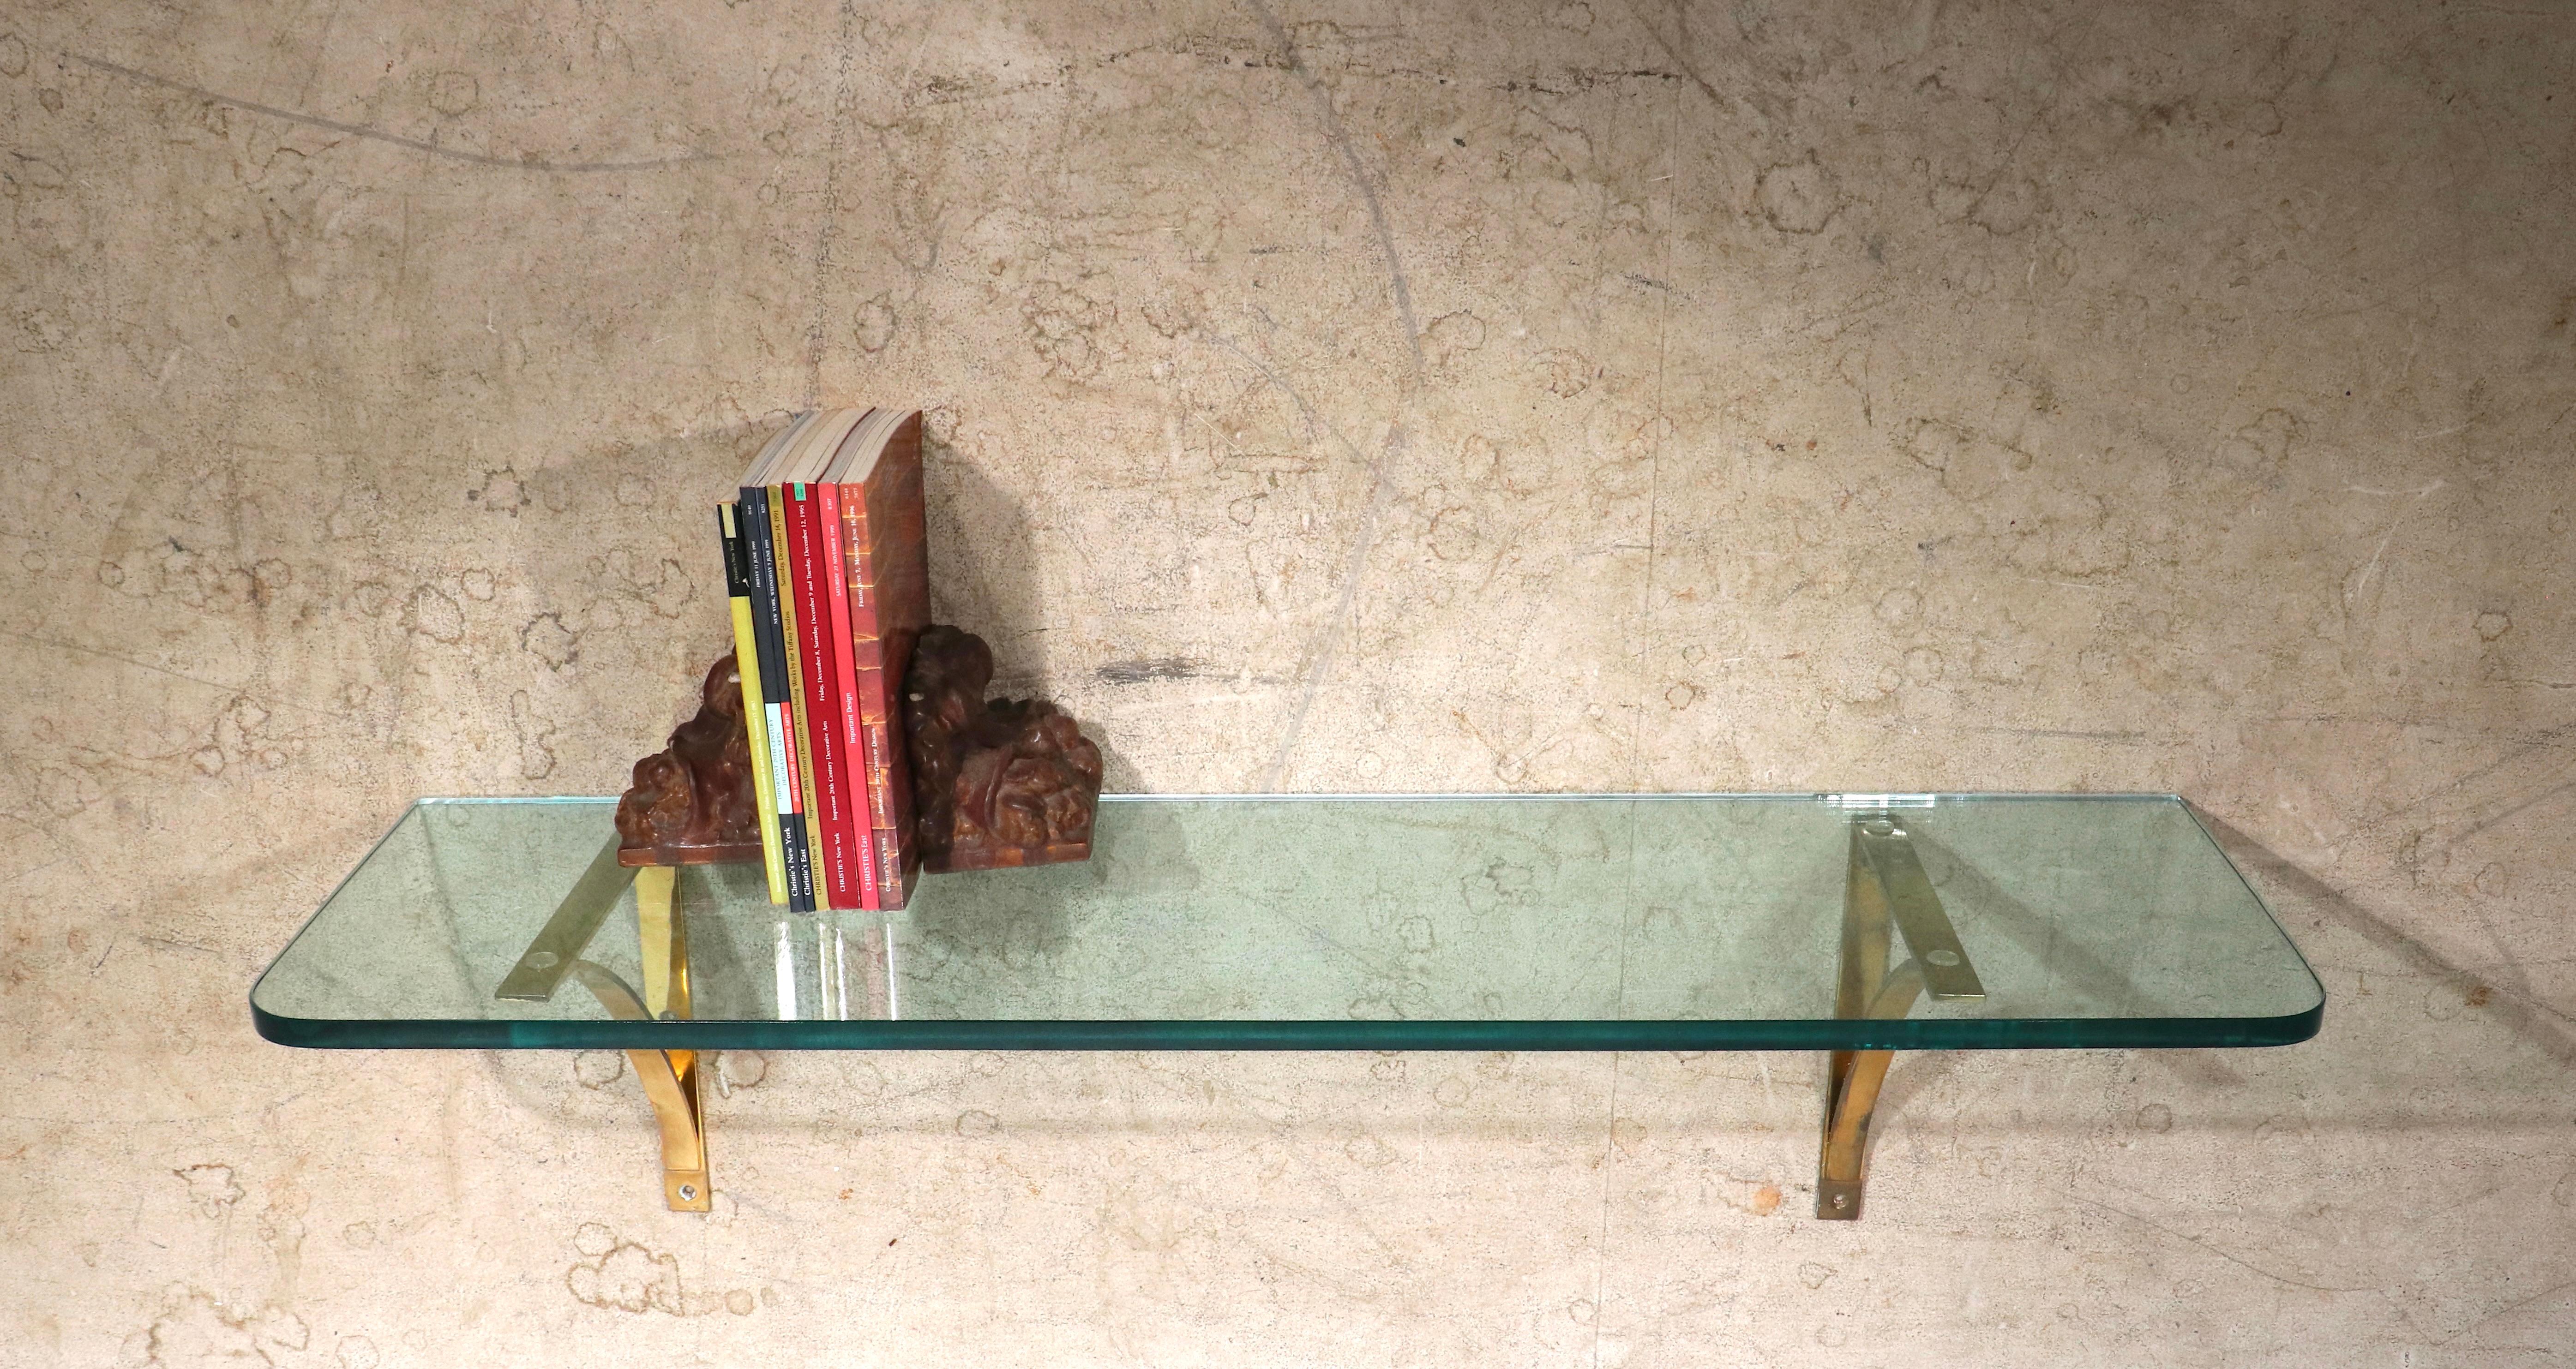 20th Century Post Modern Plate Glass and Brass Wall Mount Shelf, C. 1970's For Sale